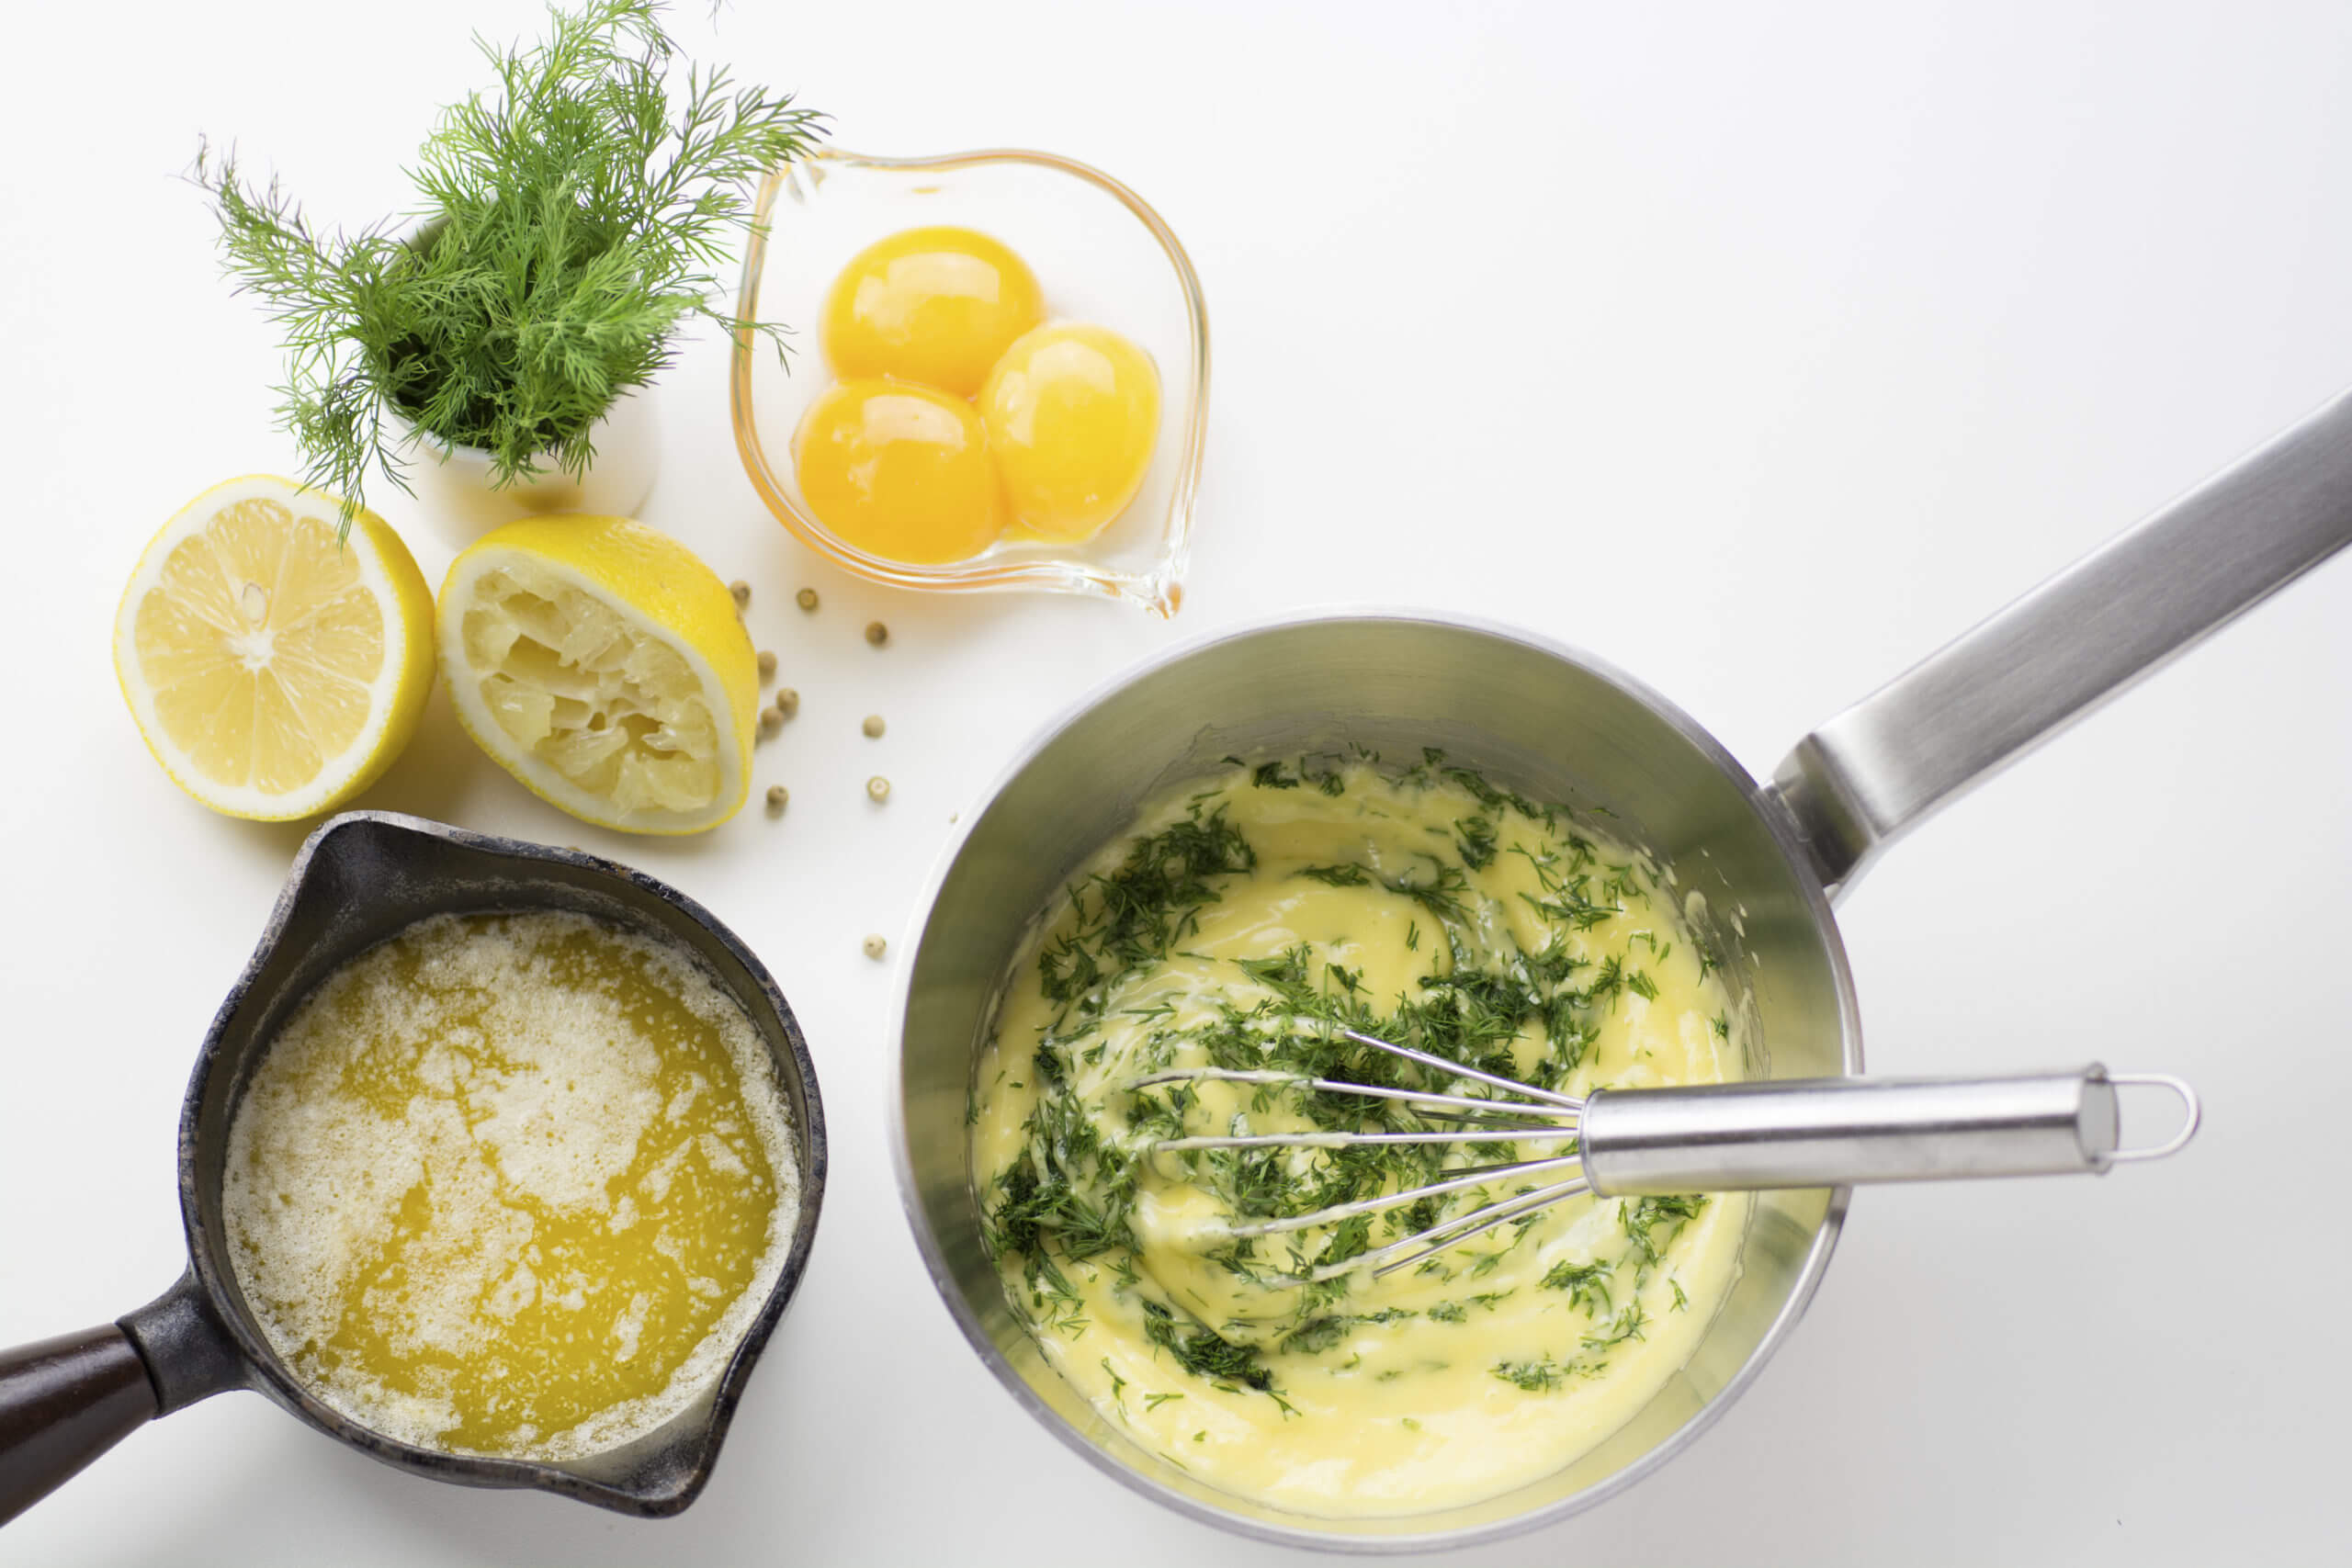 An Introduction to the 5 French Mother Sauces